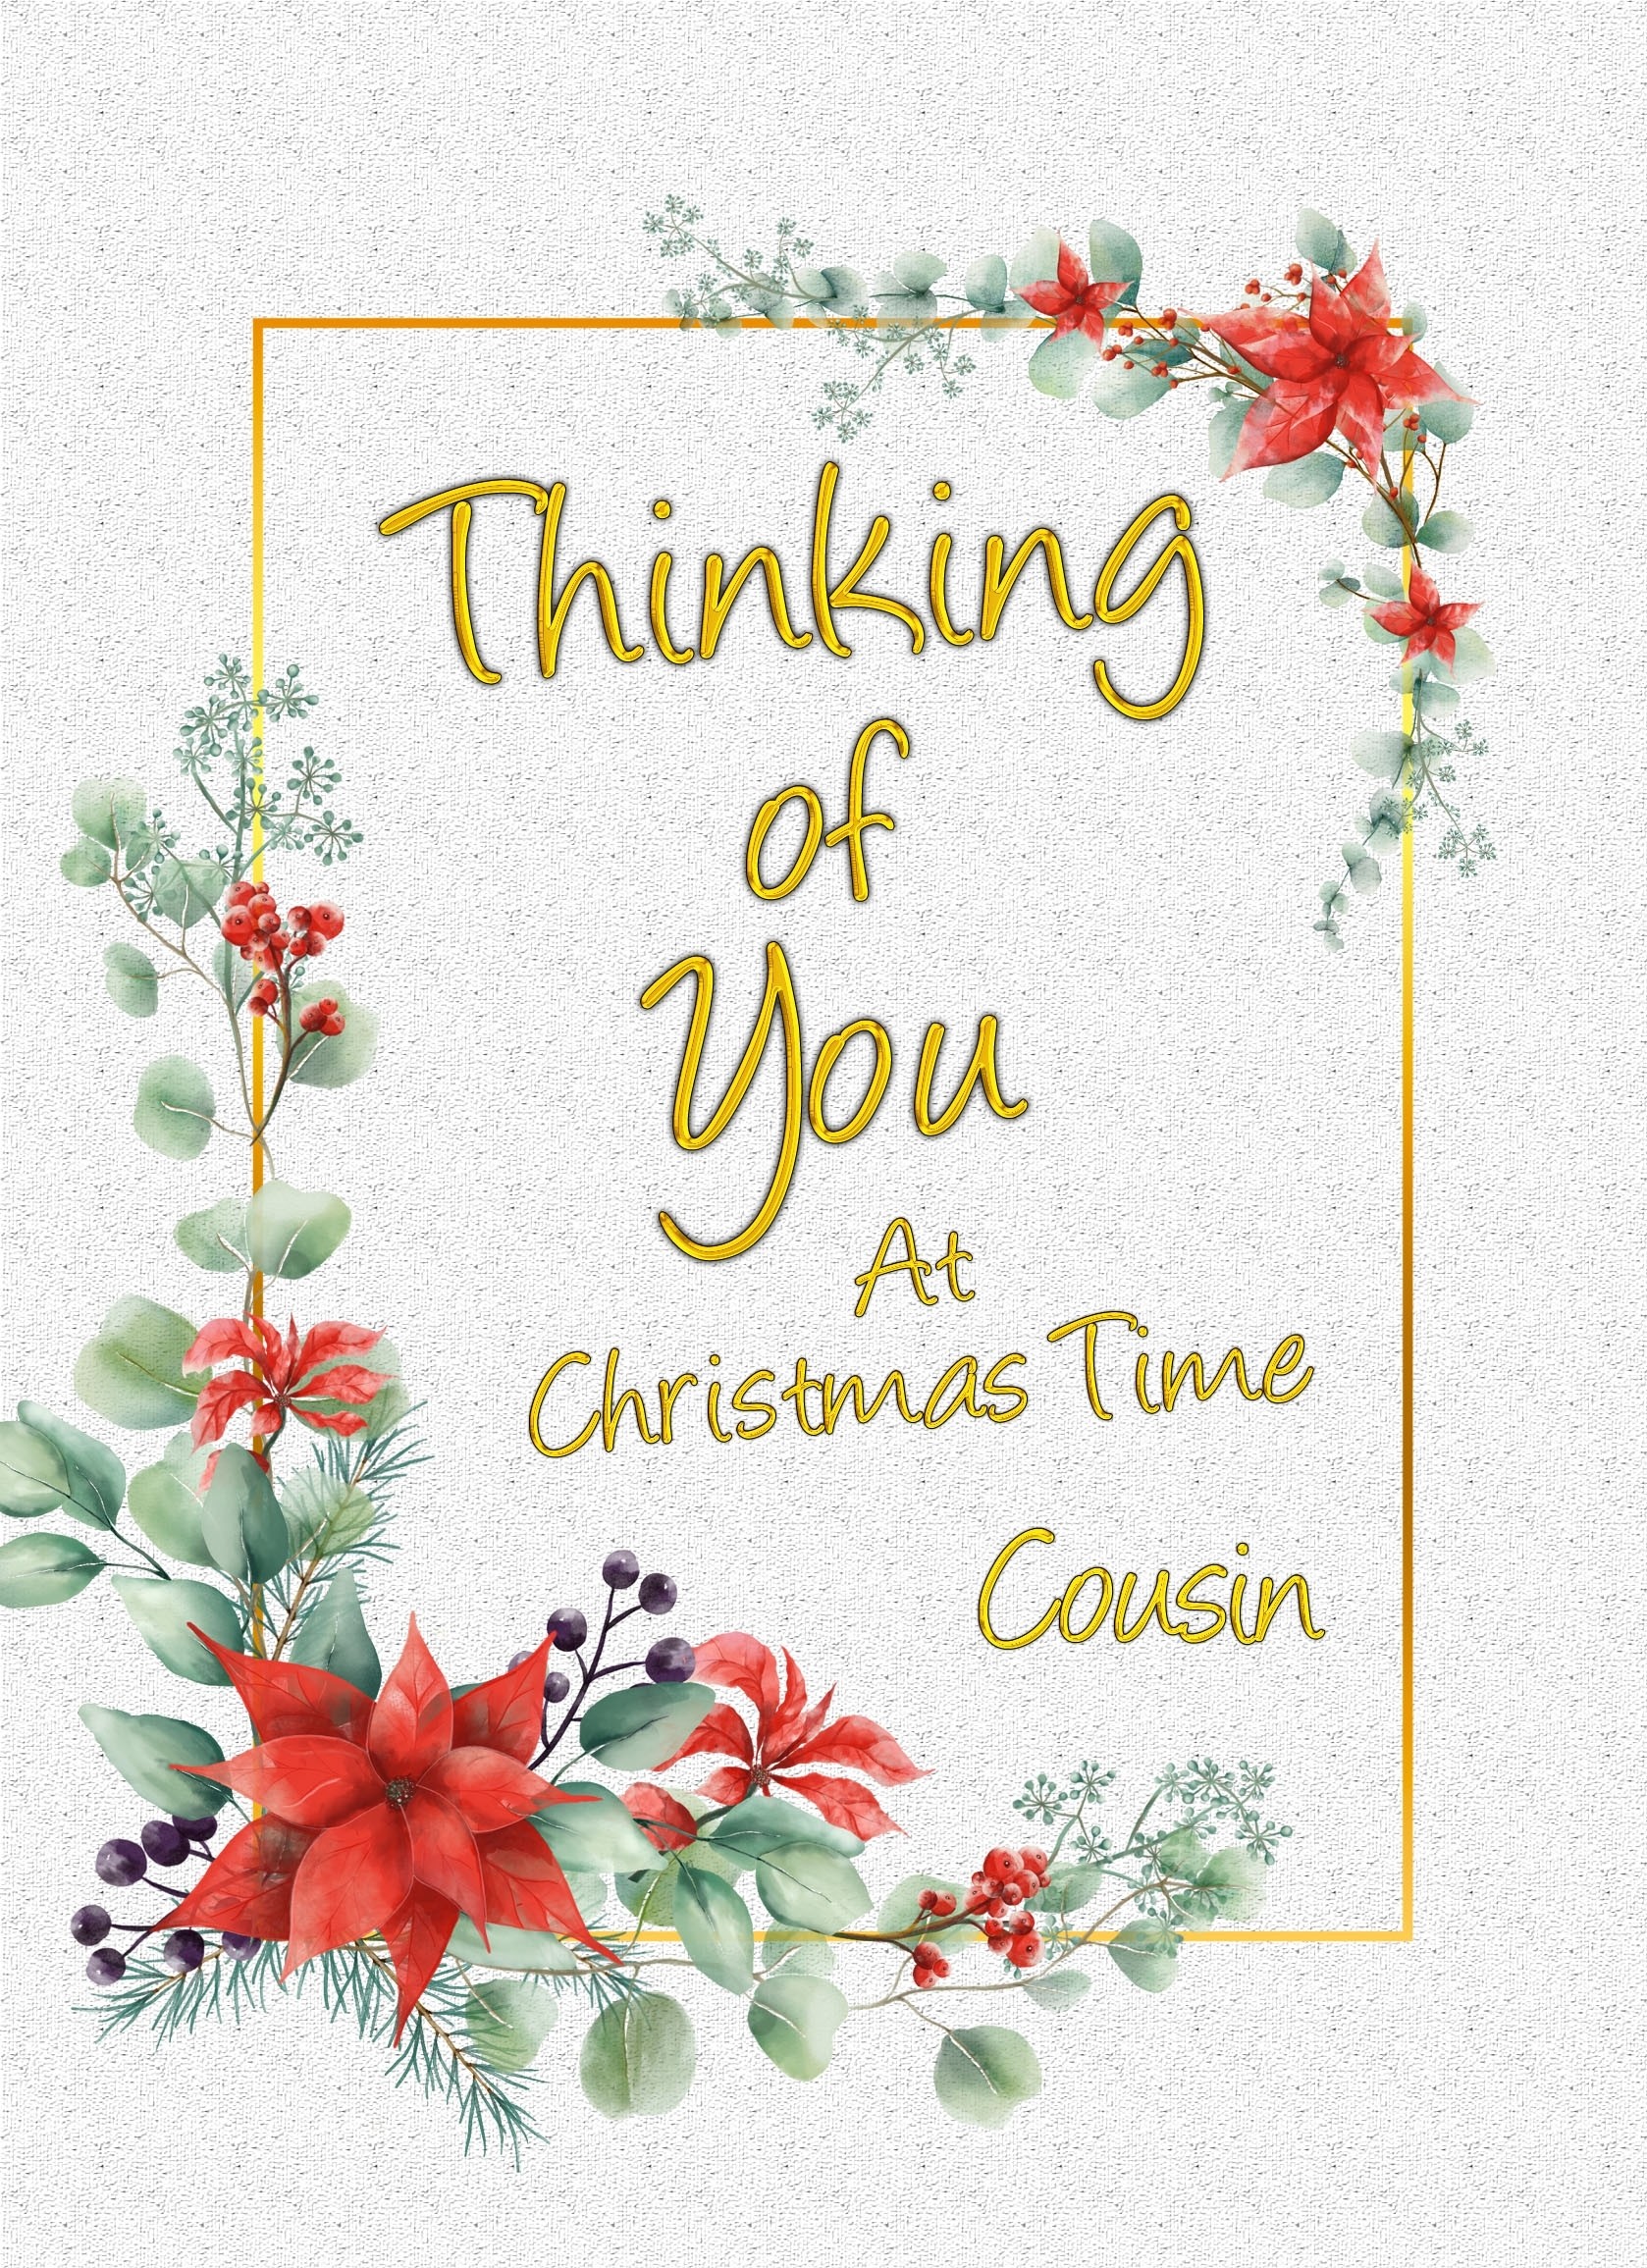 Thinking of You at Christmas Card For Cousin